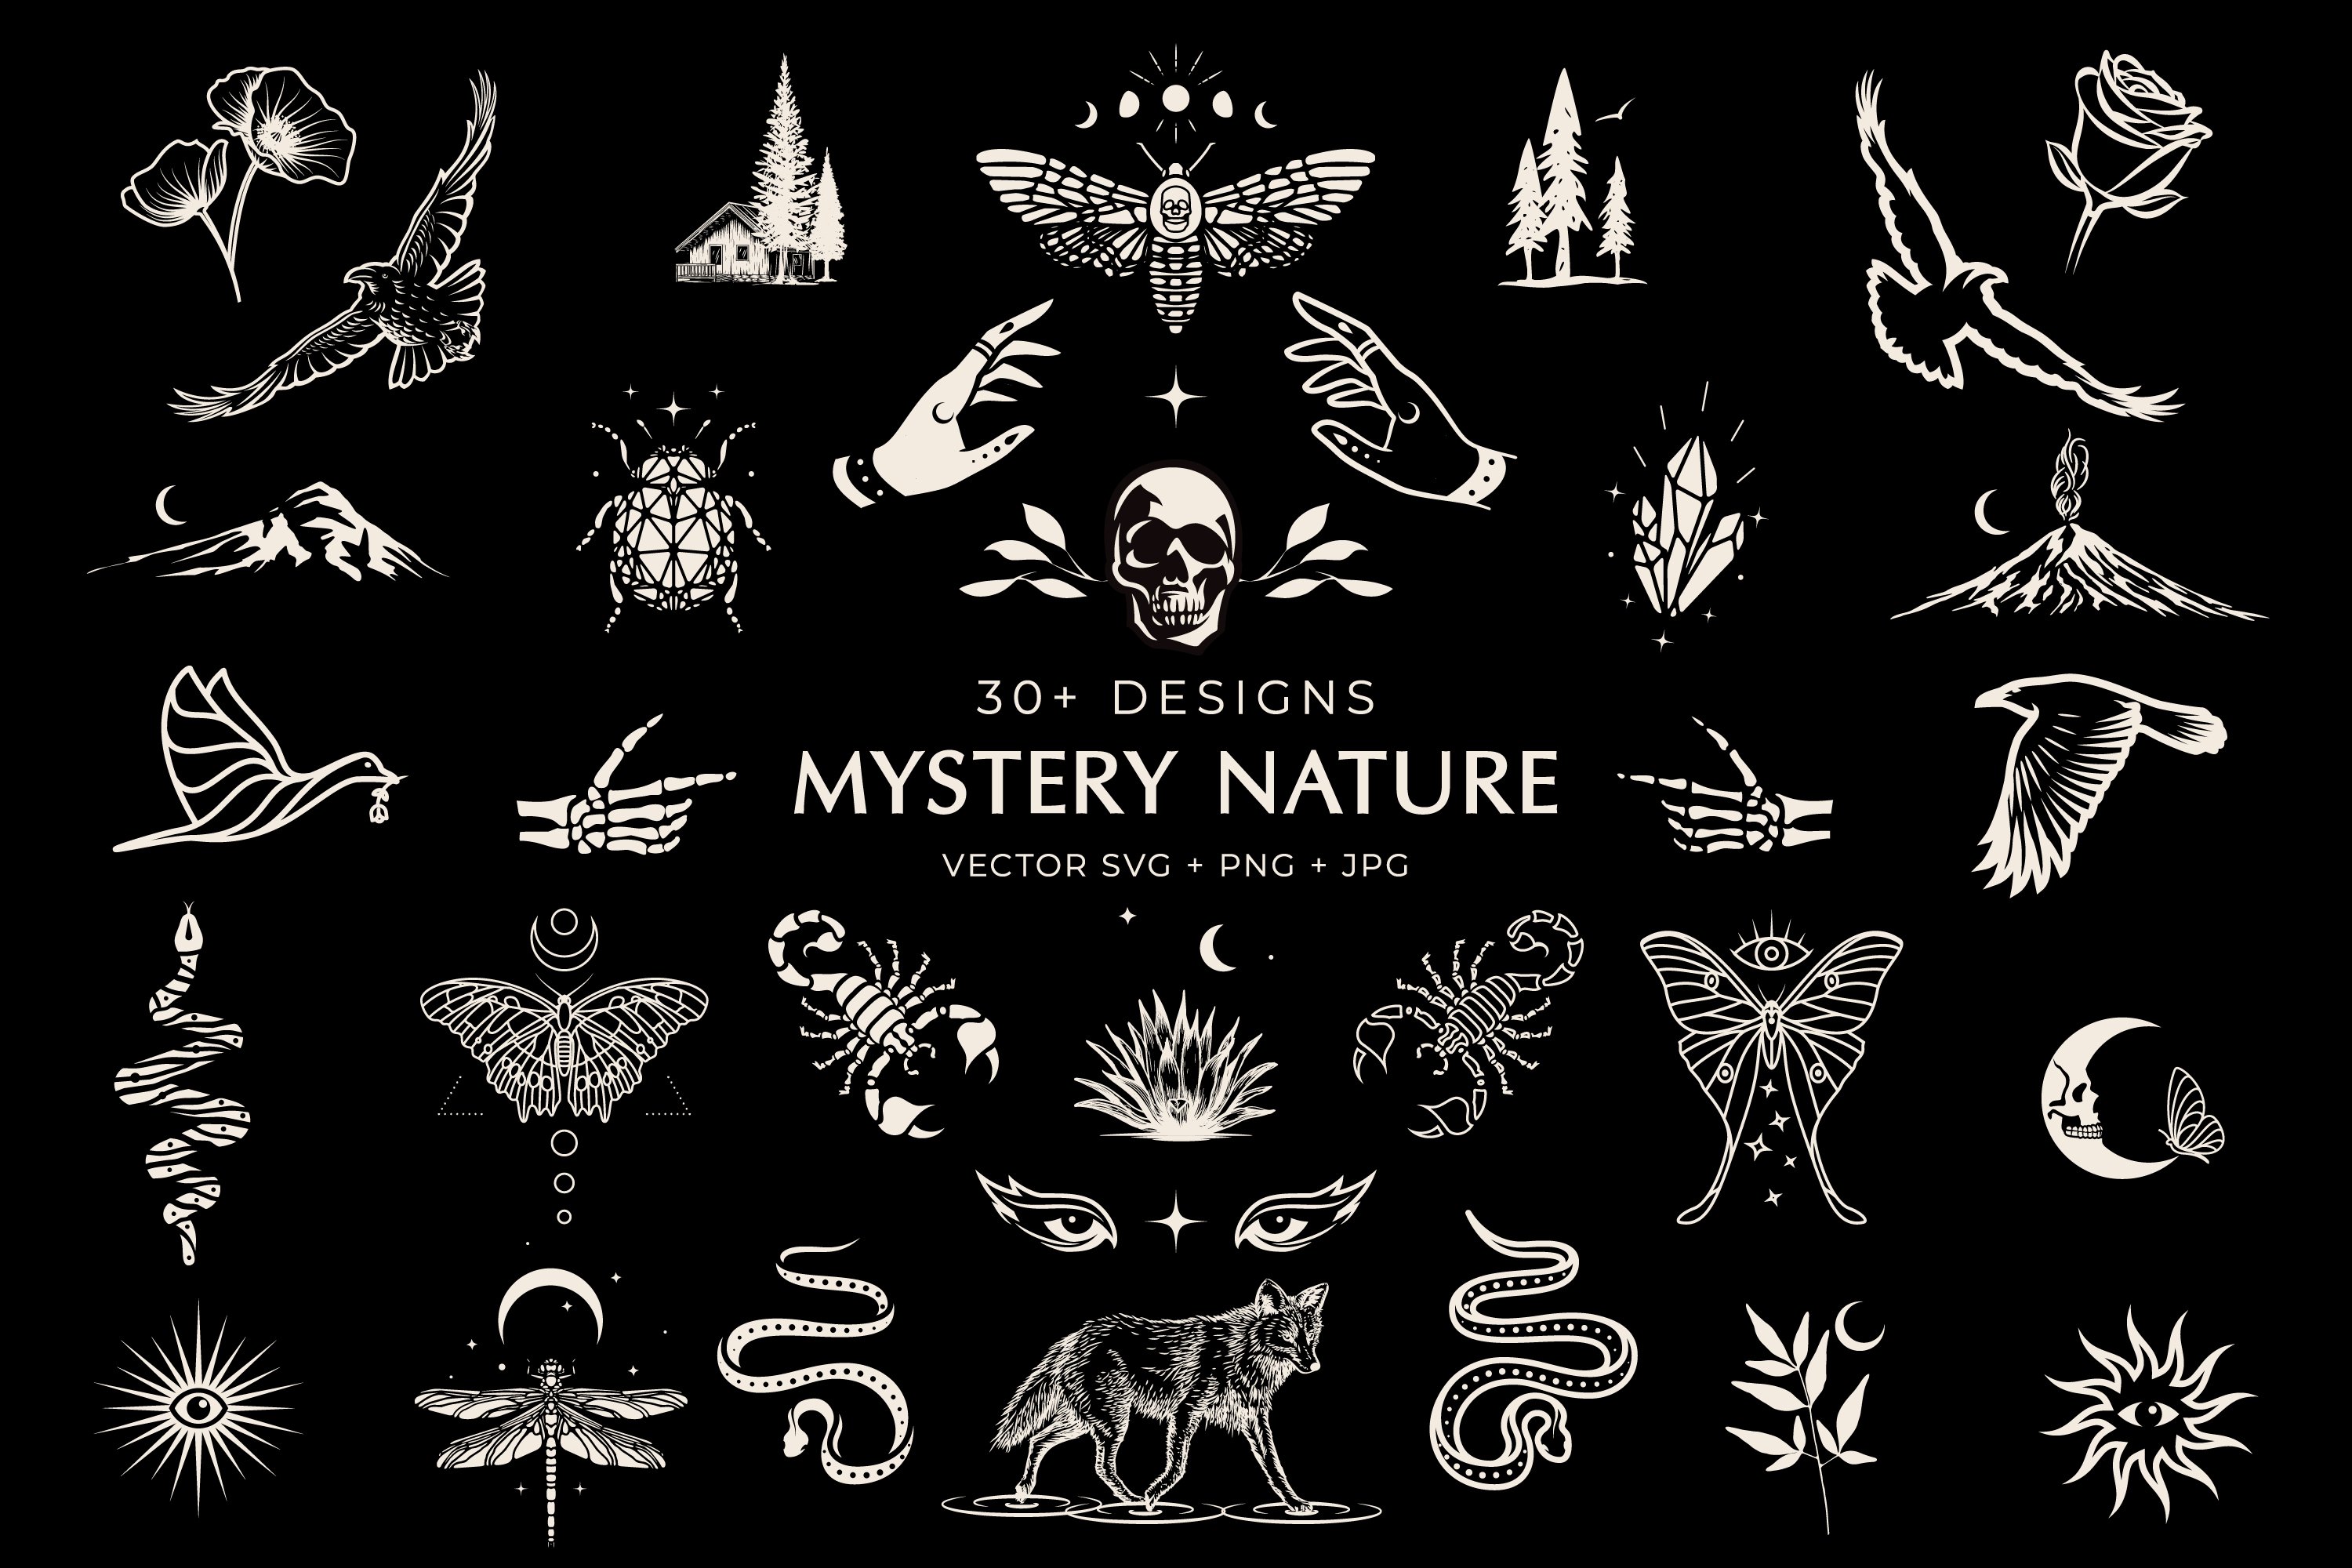 Mystery Nature vector clip art. cover image.